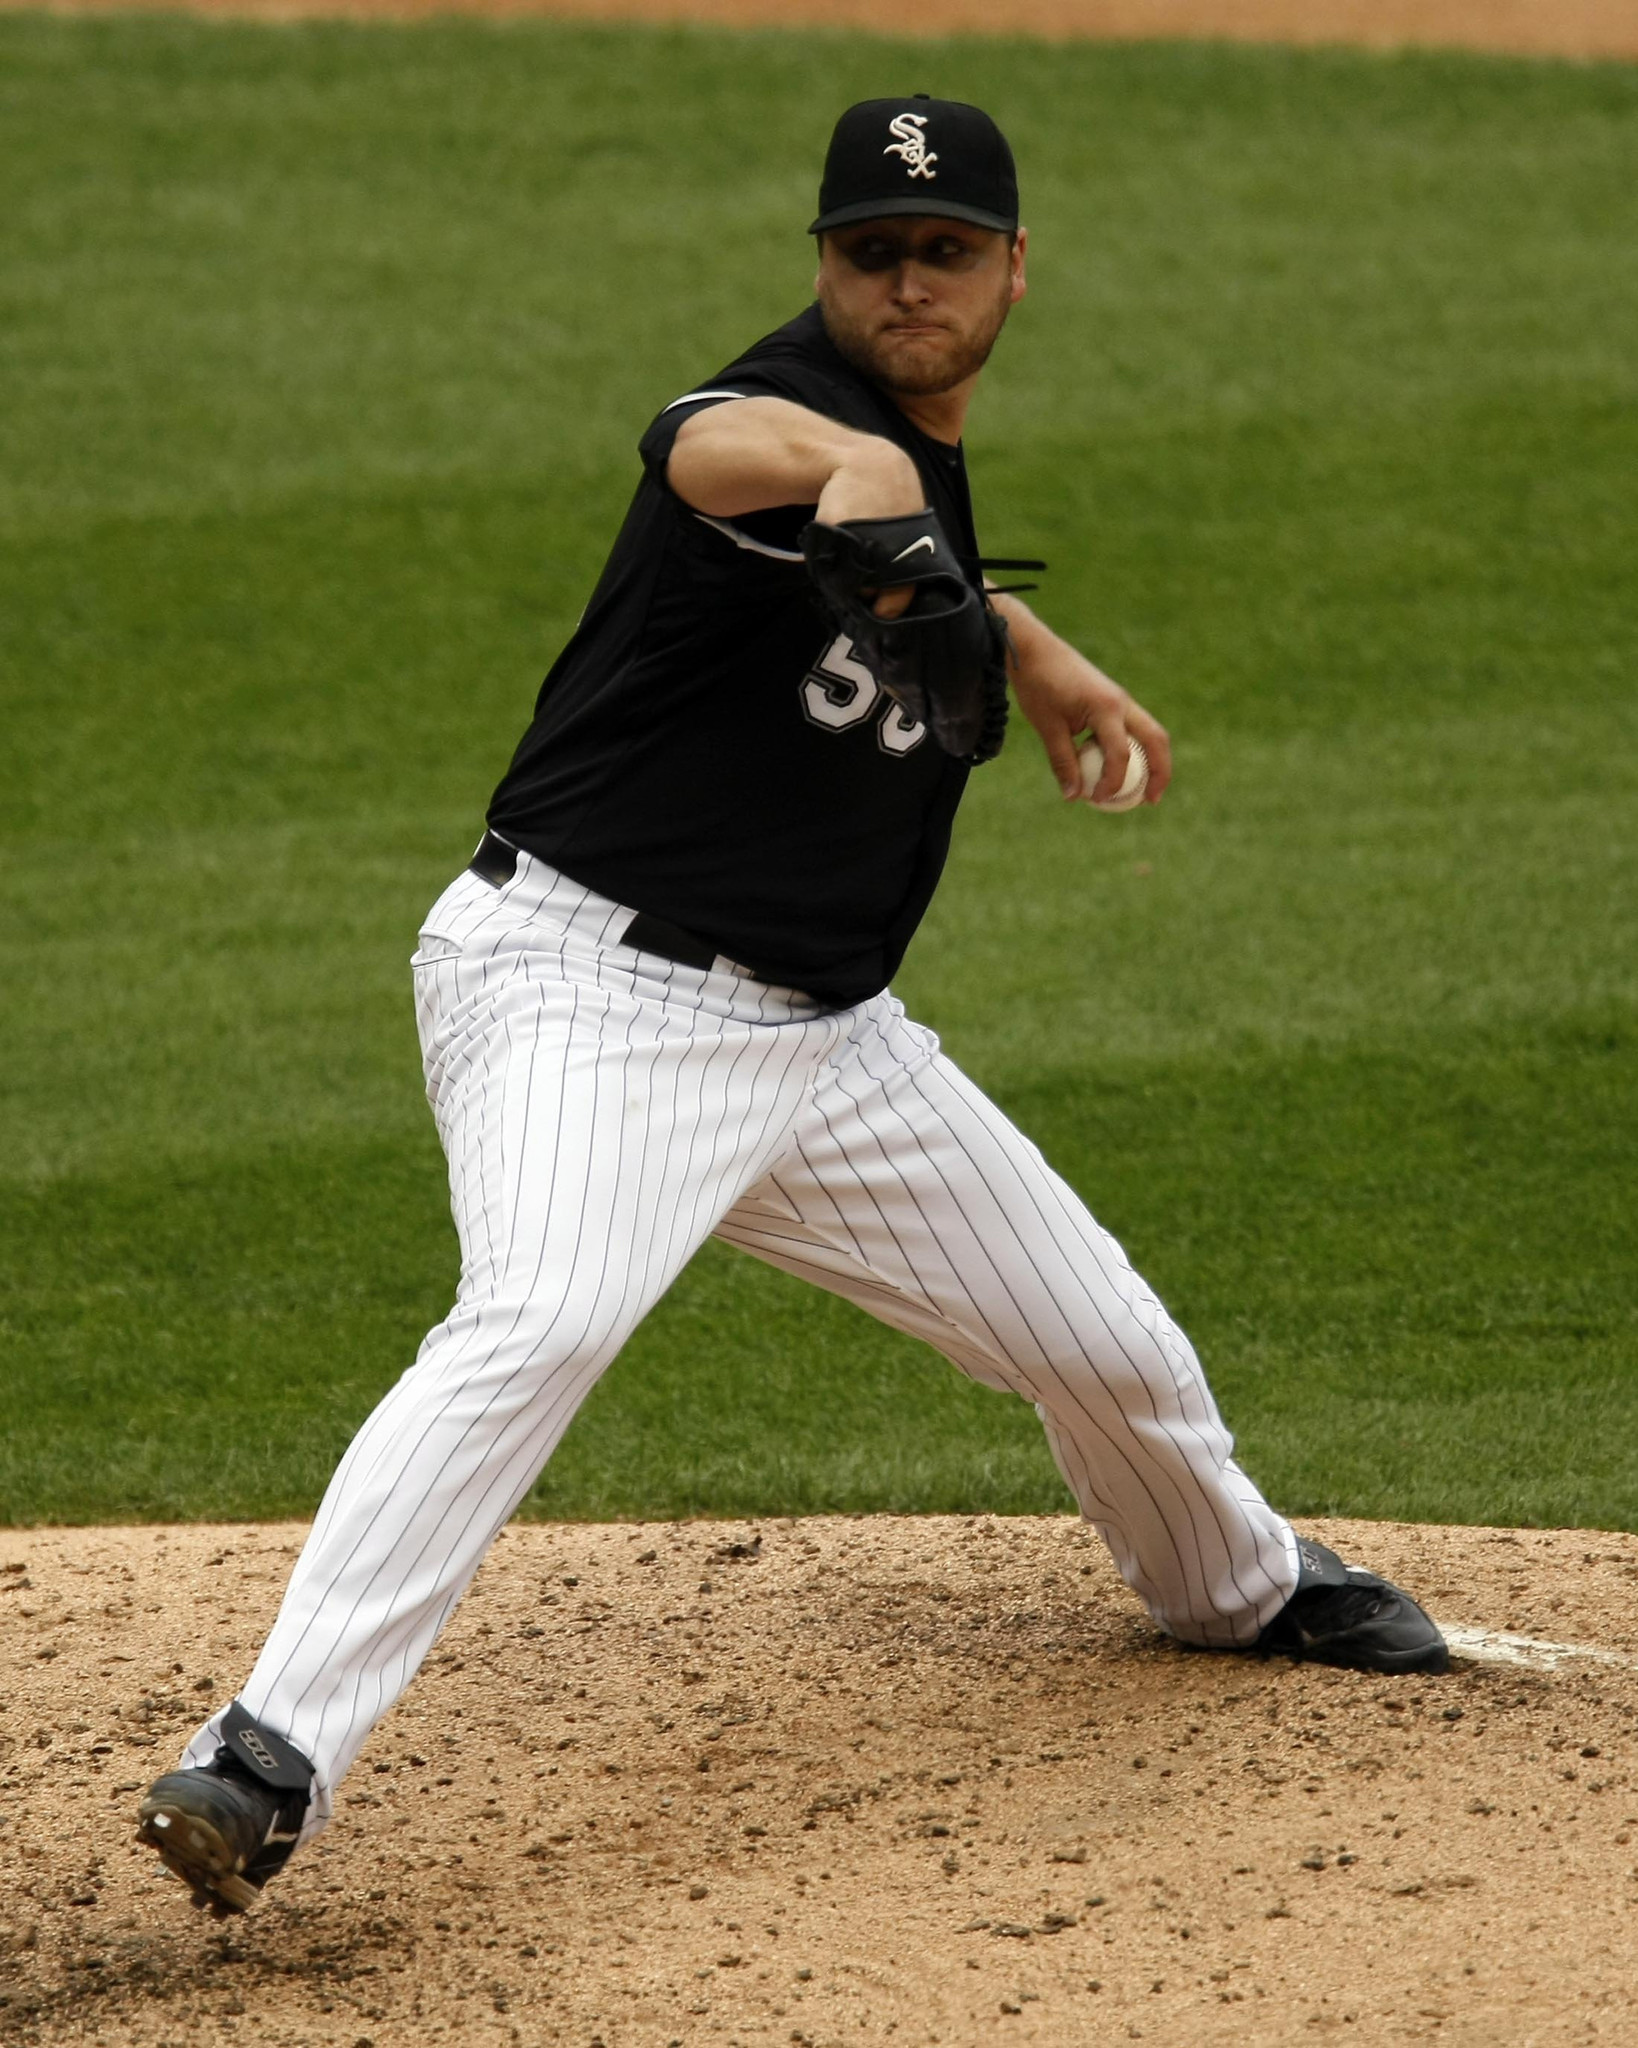 Column: Is Mark Buehrle worthy of the Hall of Fame?